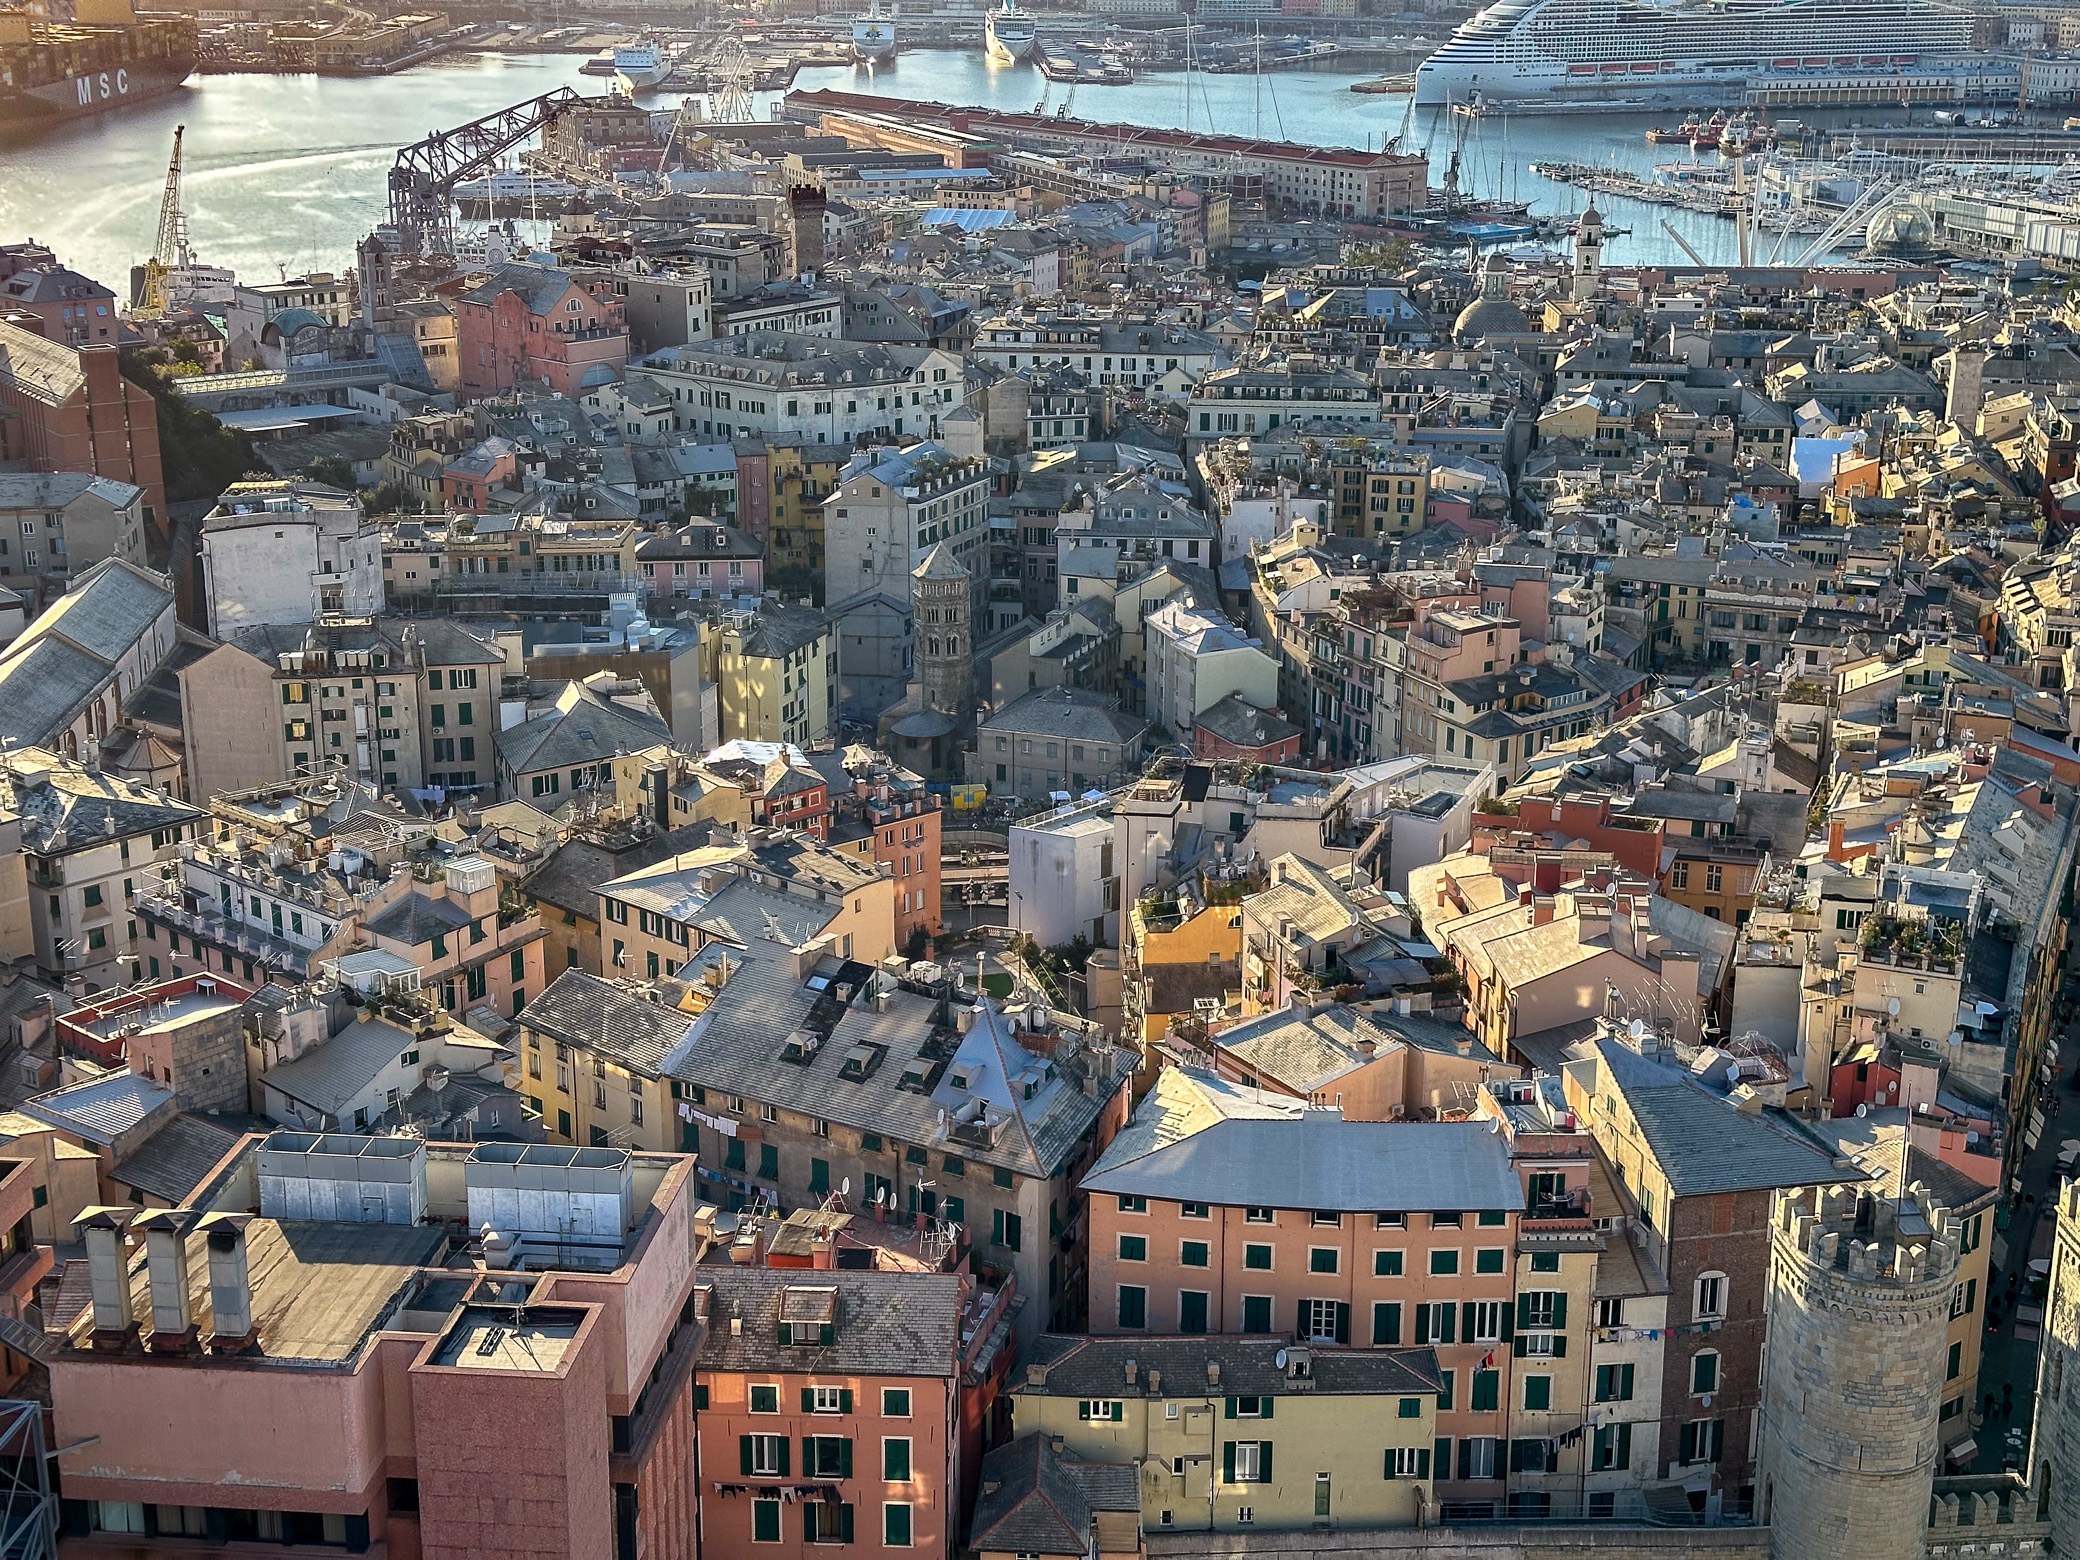 Genoa from above - seen from the Terrazza Colmbo on top of the Piacentini Skyscraper